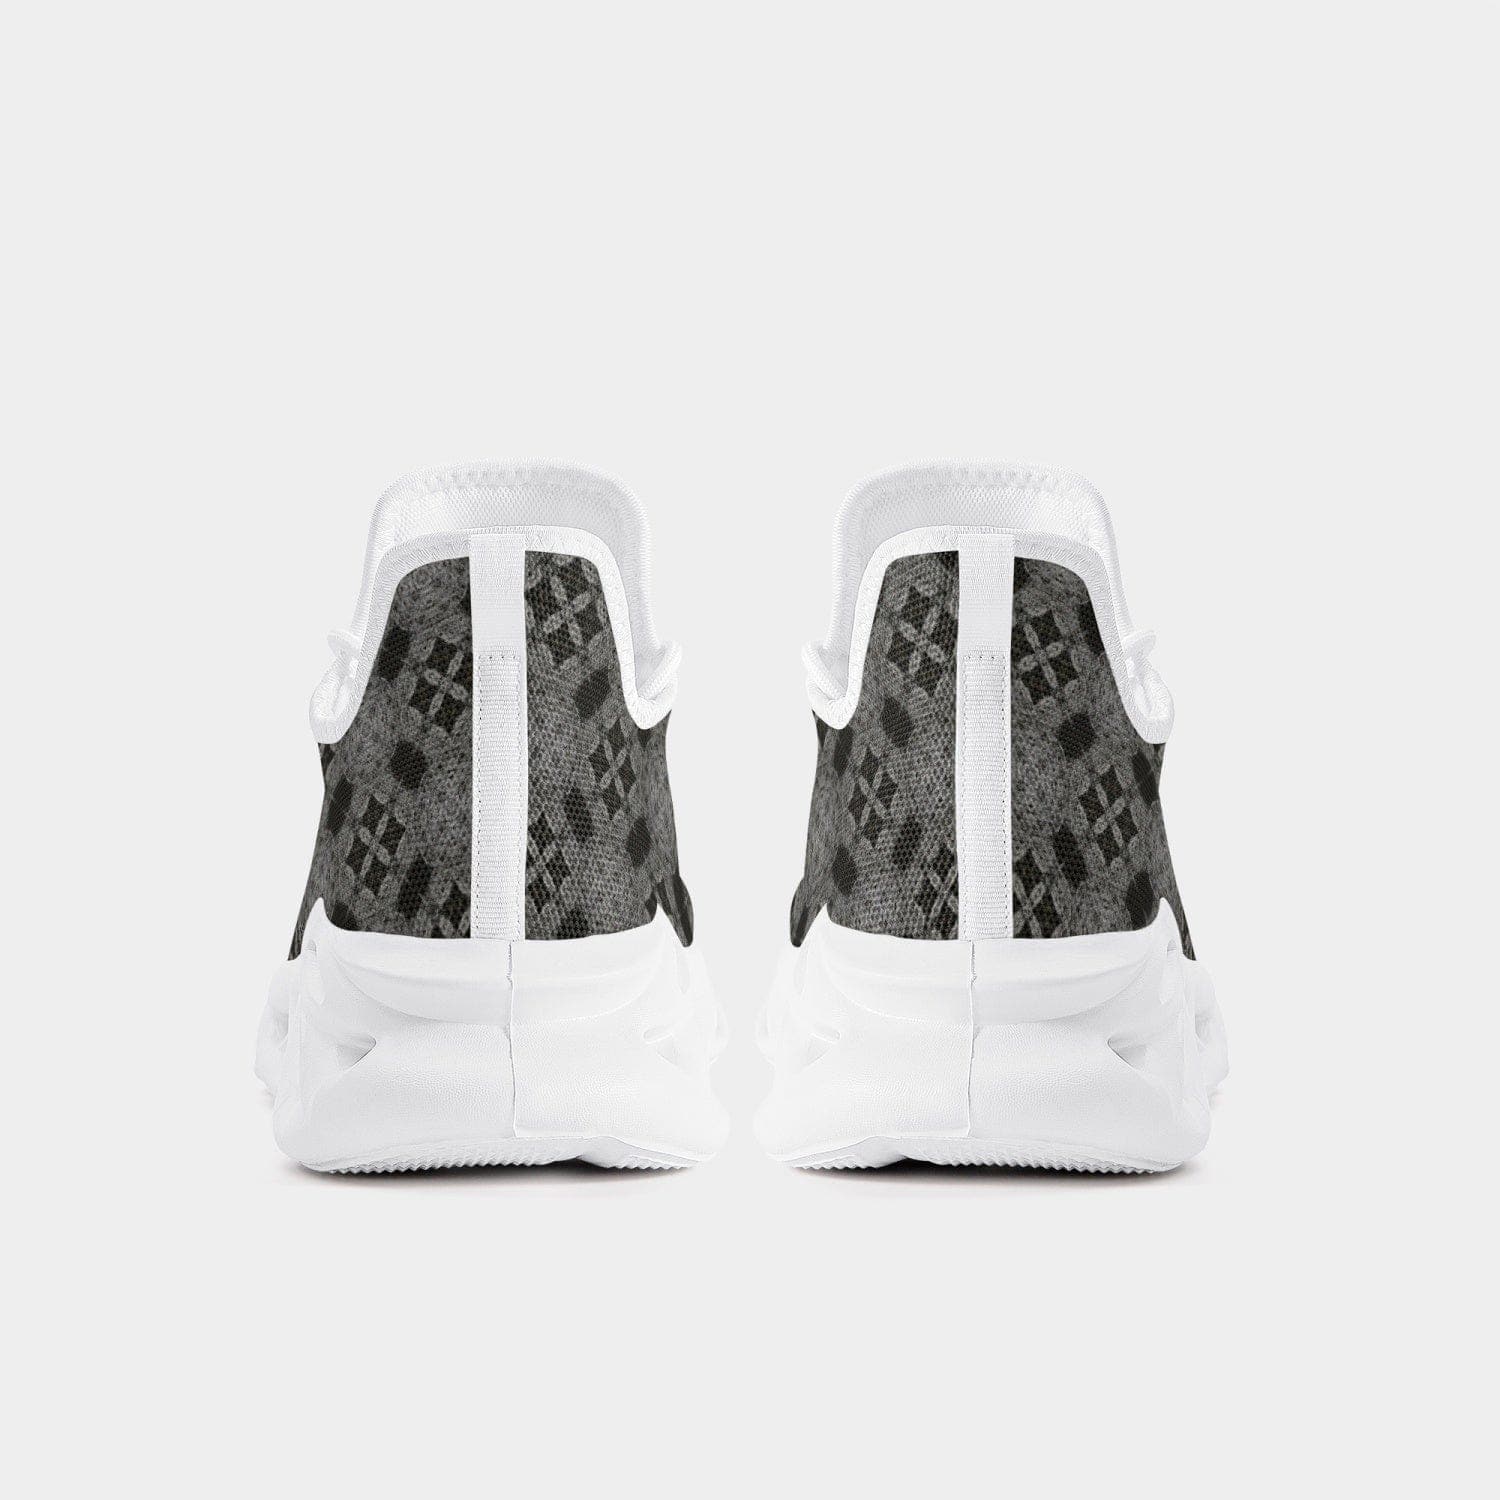 Walking on the moon,  Bounce Mesh Knit Stylish Unisex Sneakers - White, designed by Sensus Studio Design